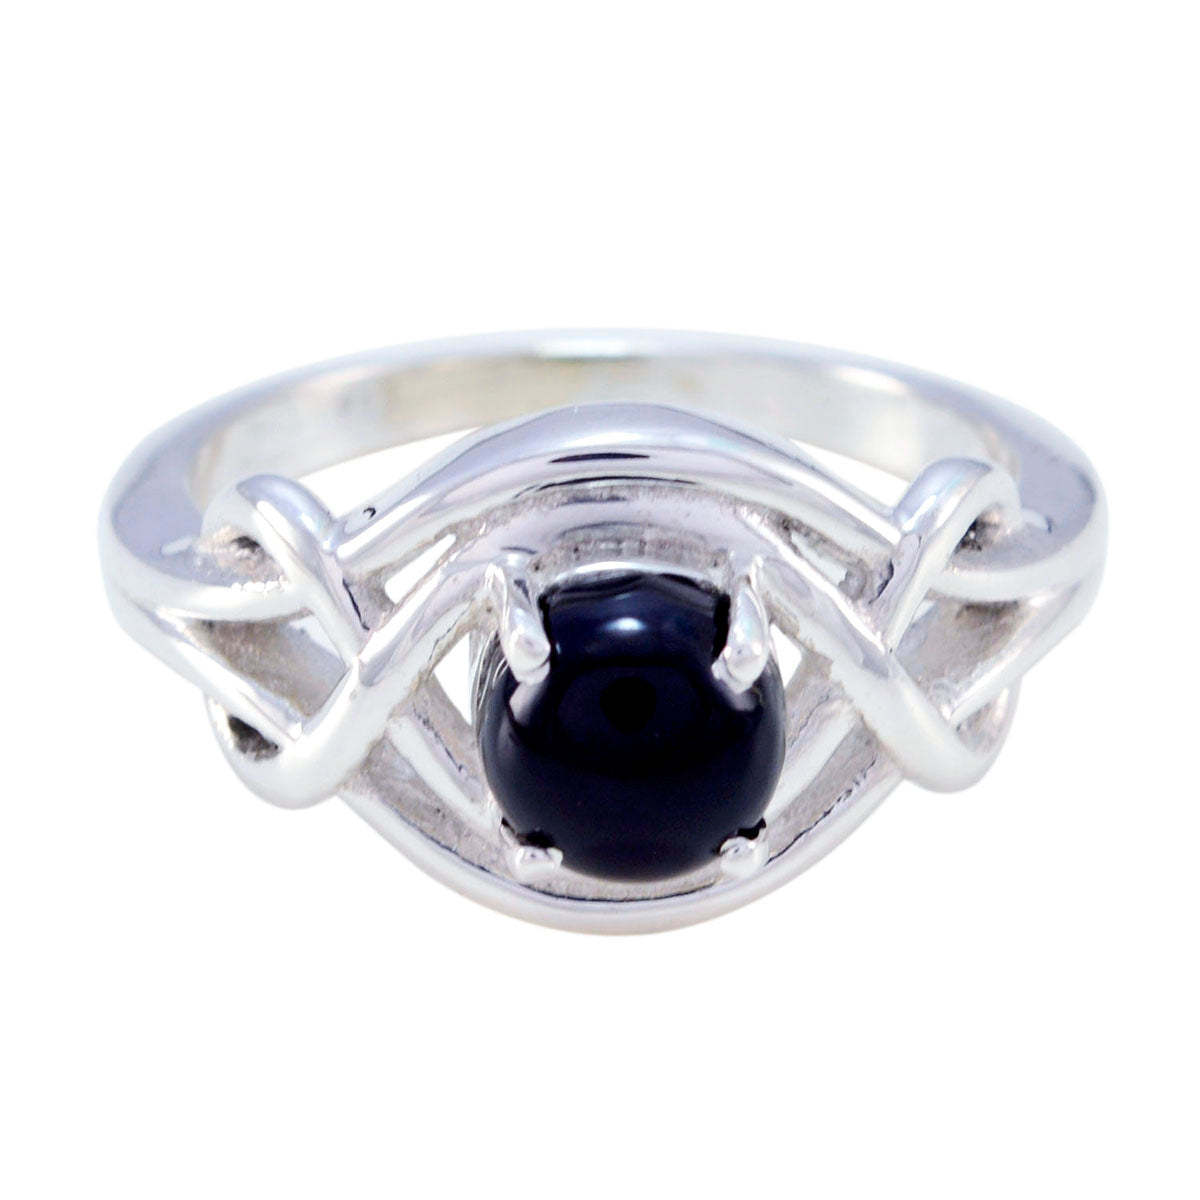 Excellent Gem Black Onyx 925 Sterling Silver Ring Infinity Jewelry